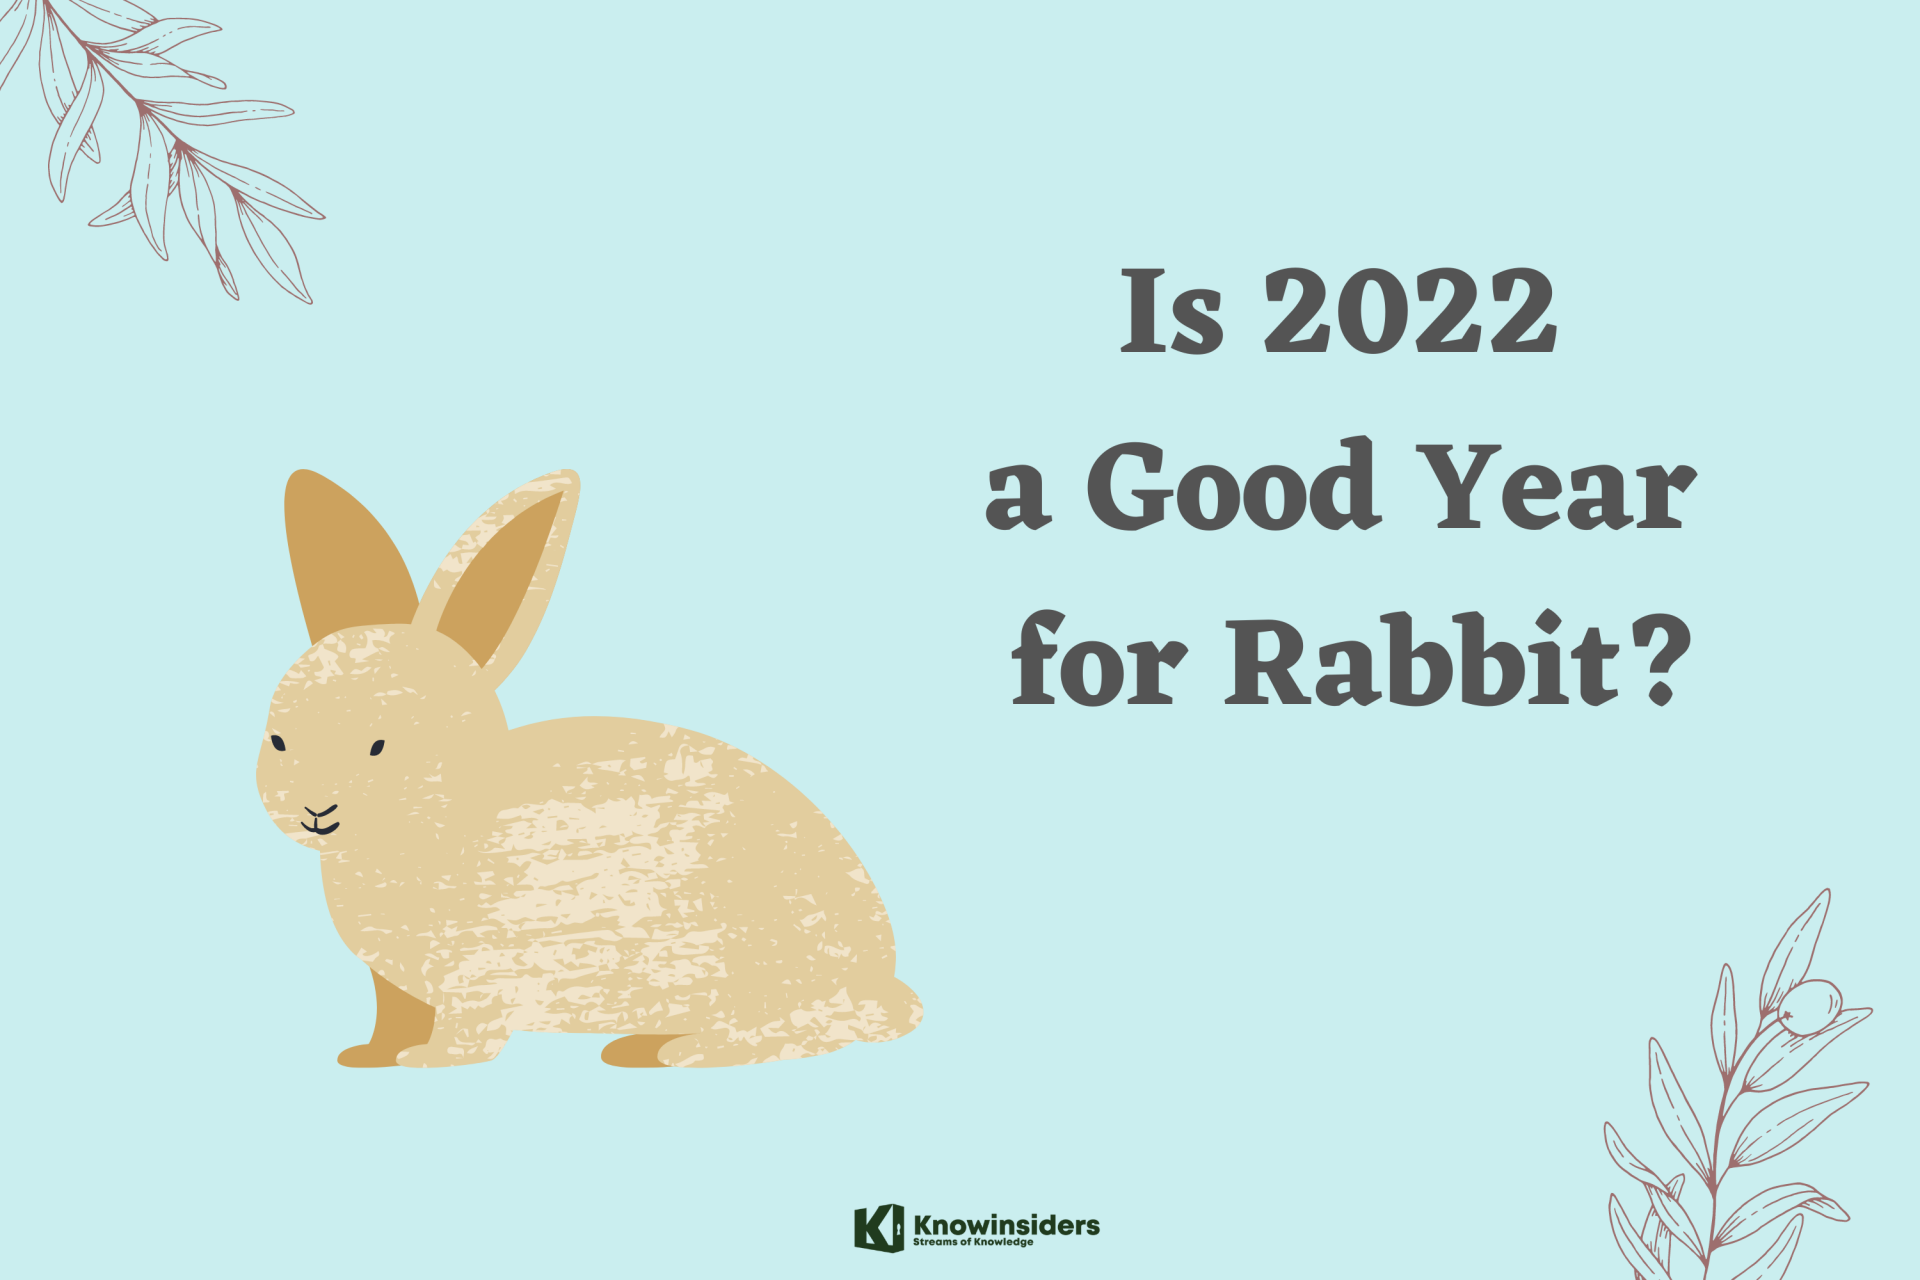 Is 2022 a Good Year for Rabbit?